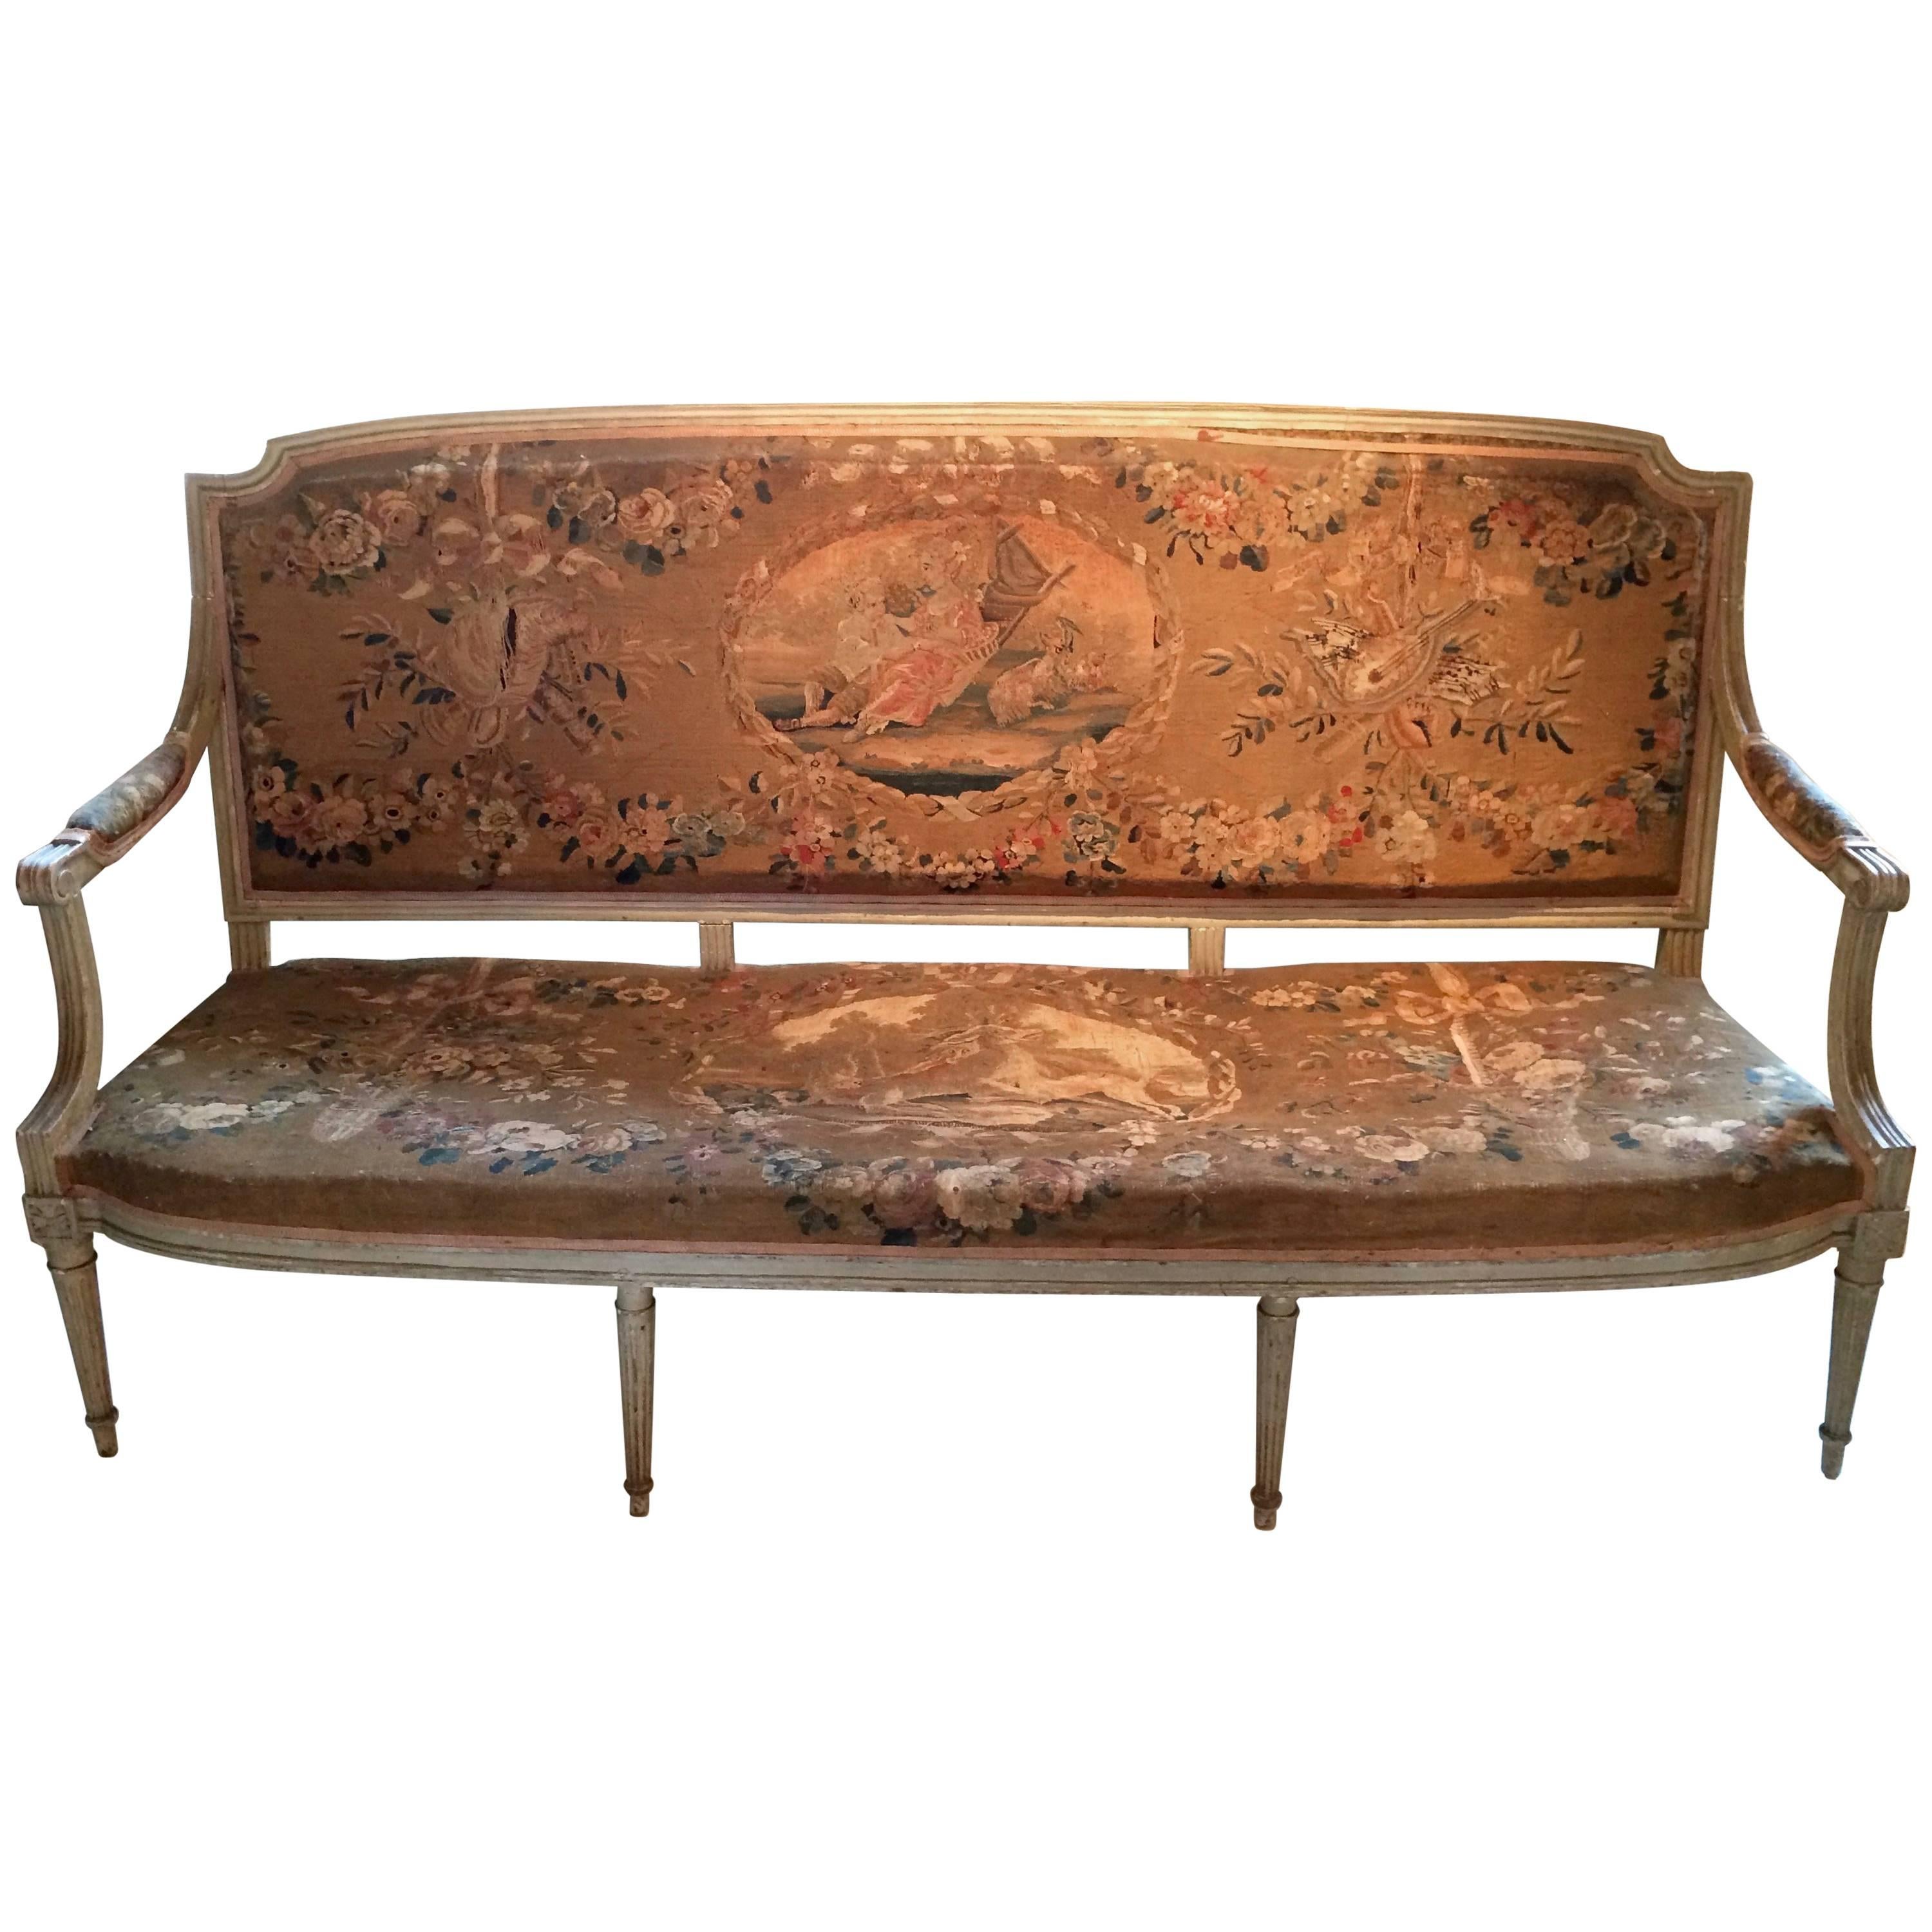 Museum Quality Original Louis XVI Tapestry and Painted Canape Sofa